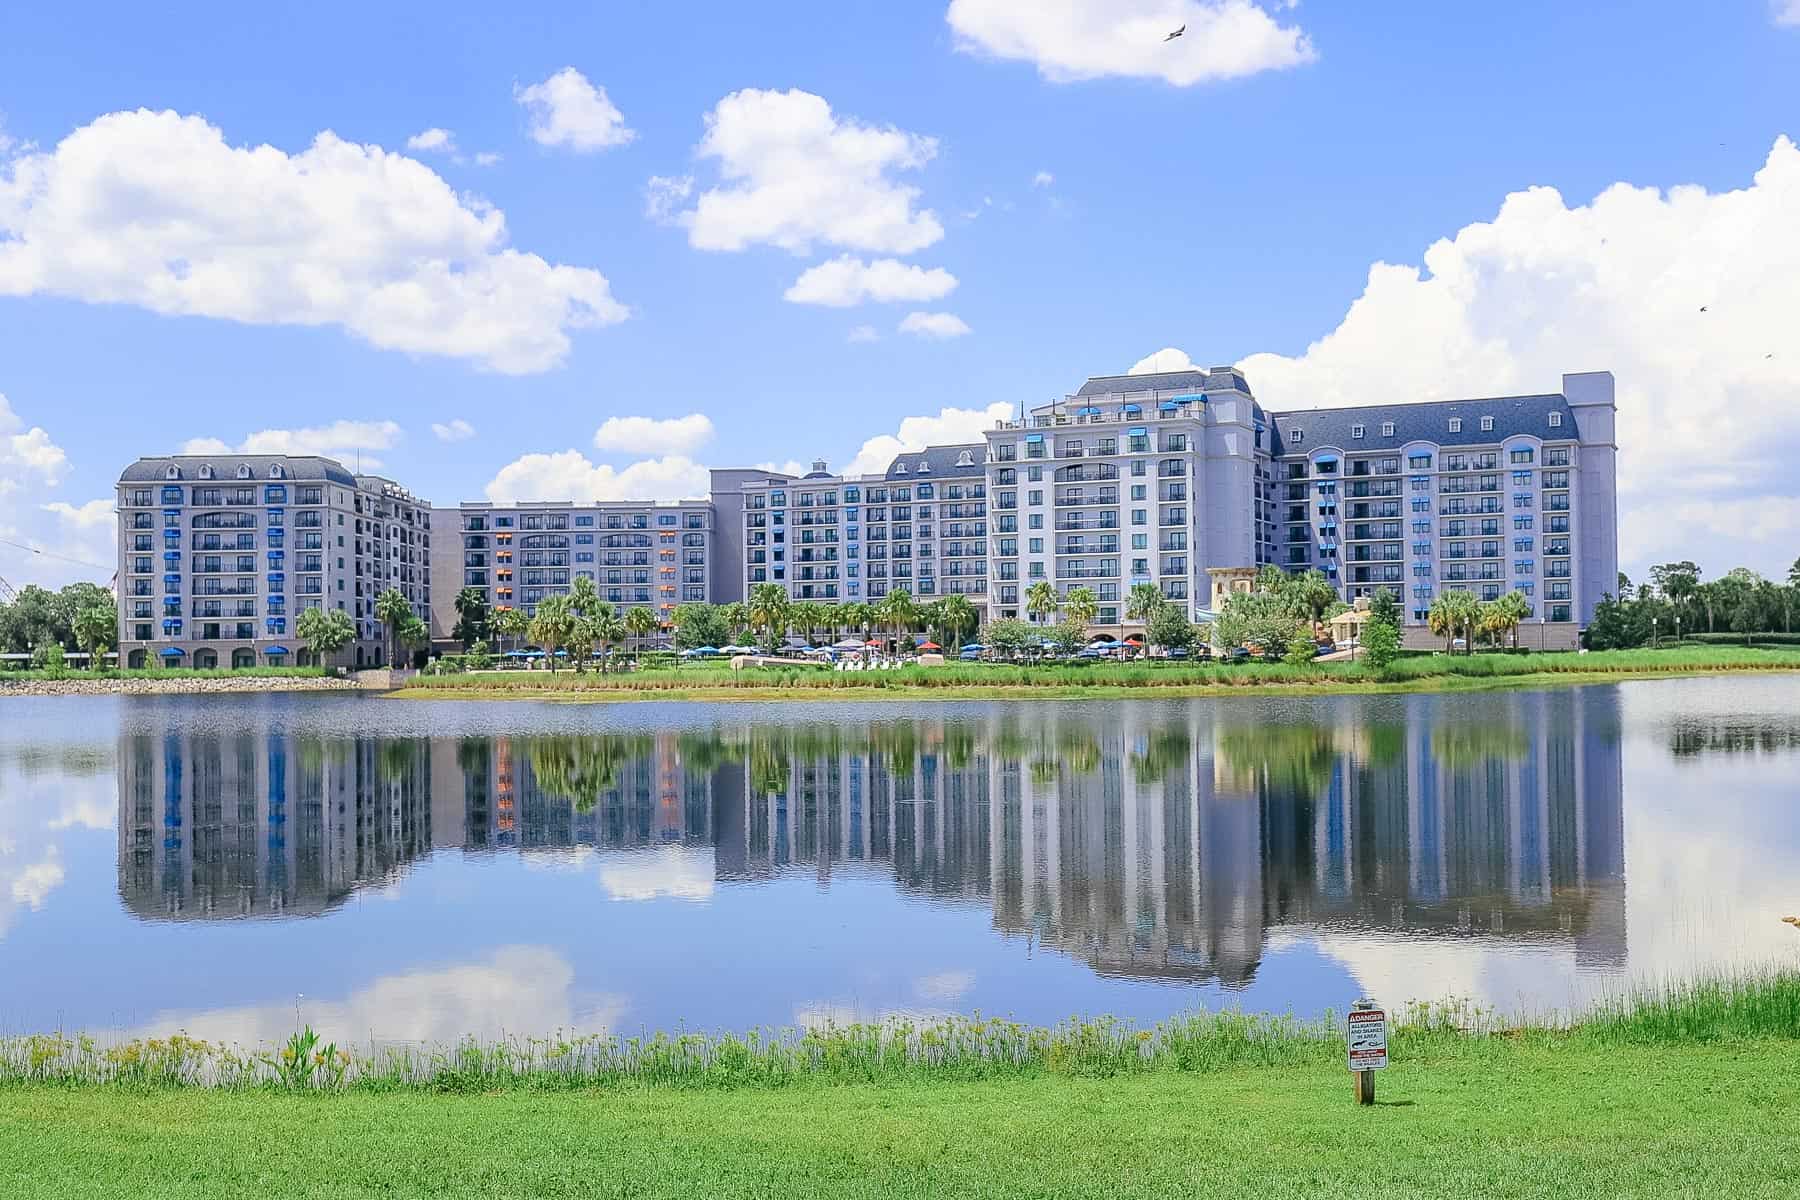 a photo that shows a reflection of Disney's Riviera Resort in the lake at Barefoot Bay